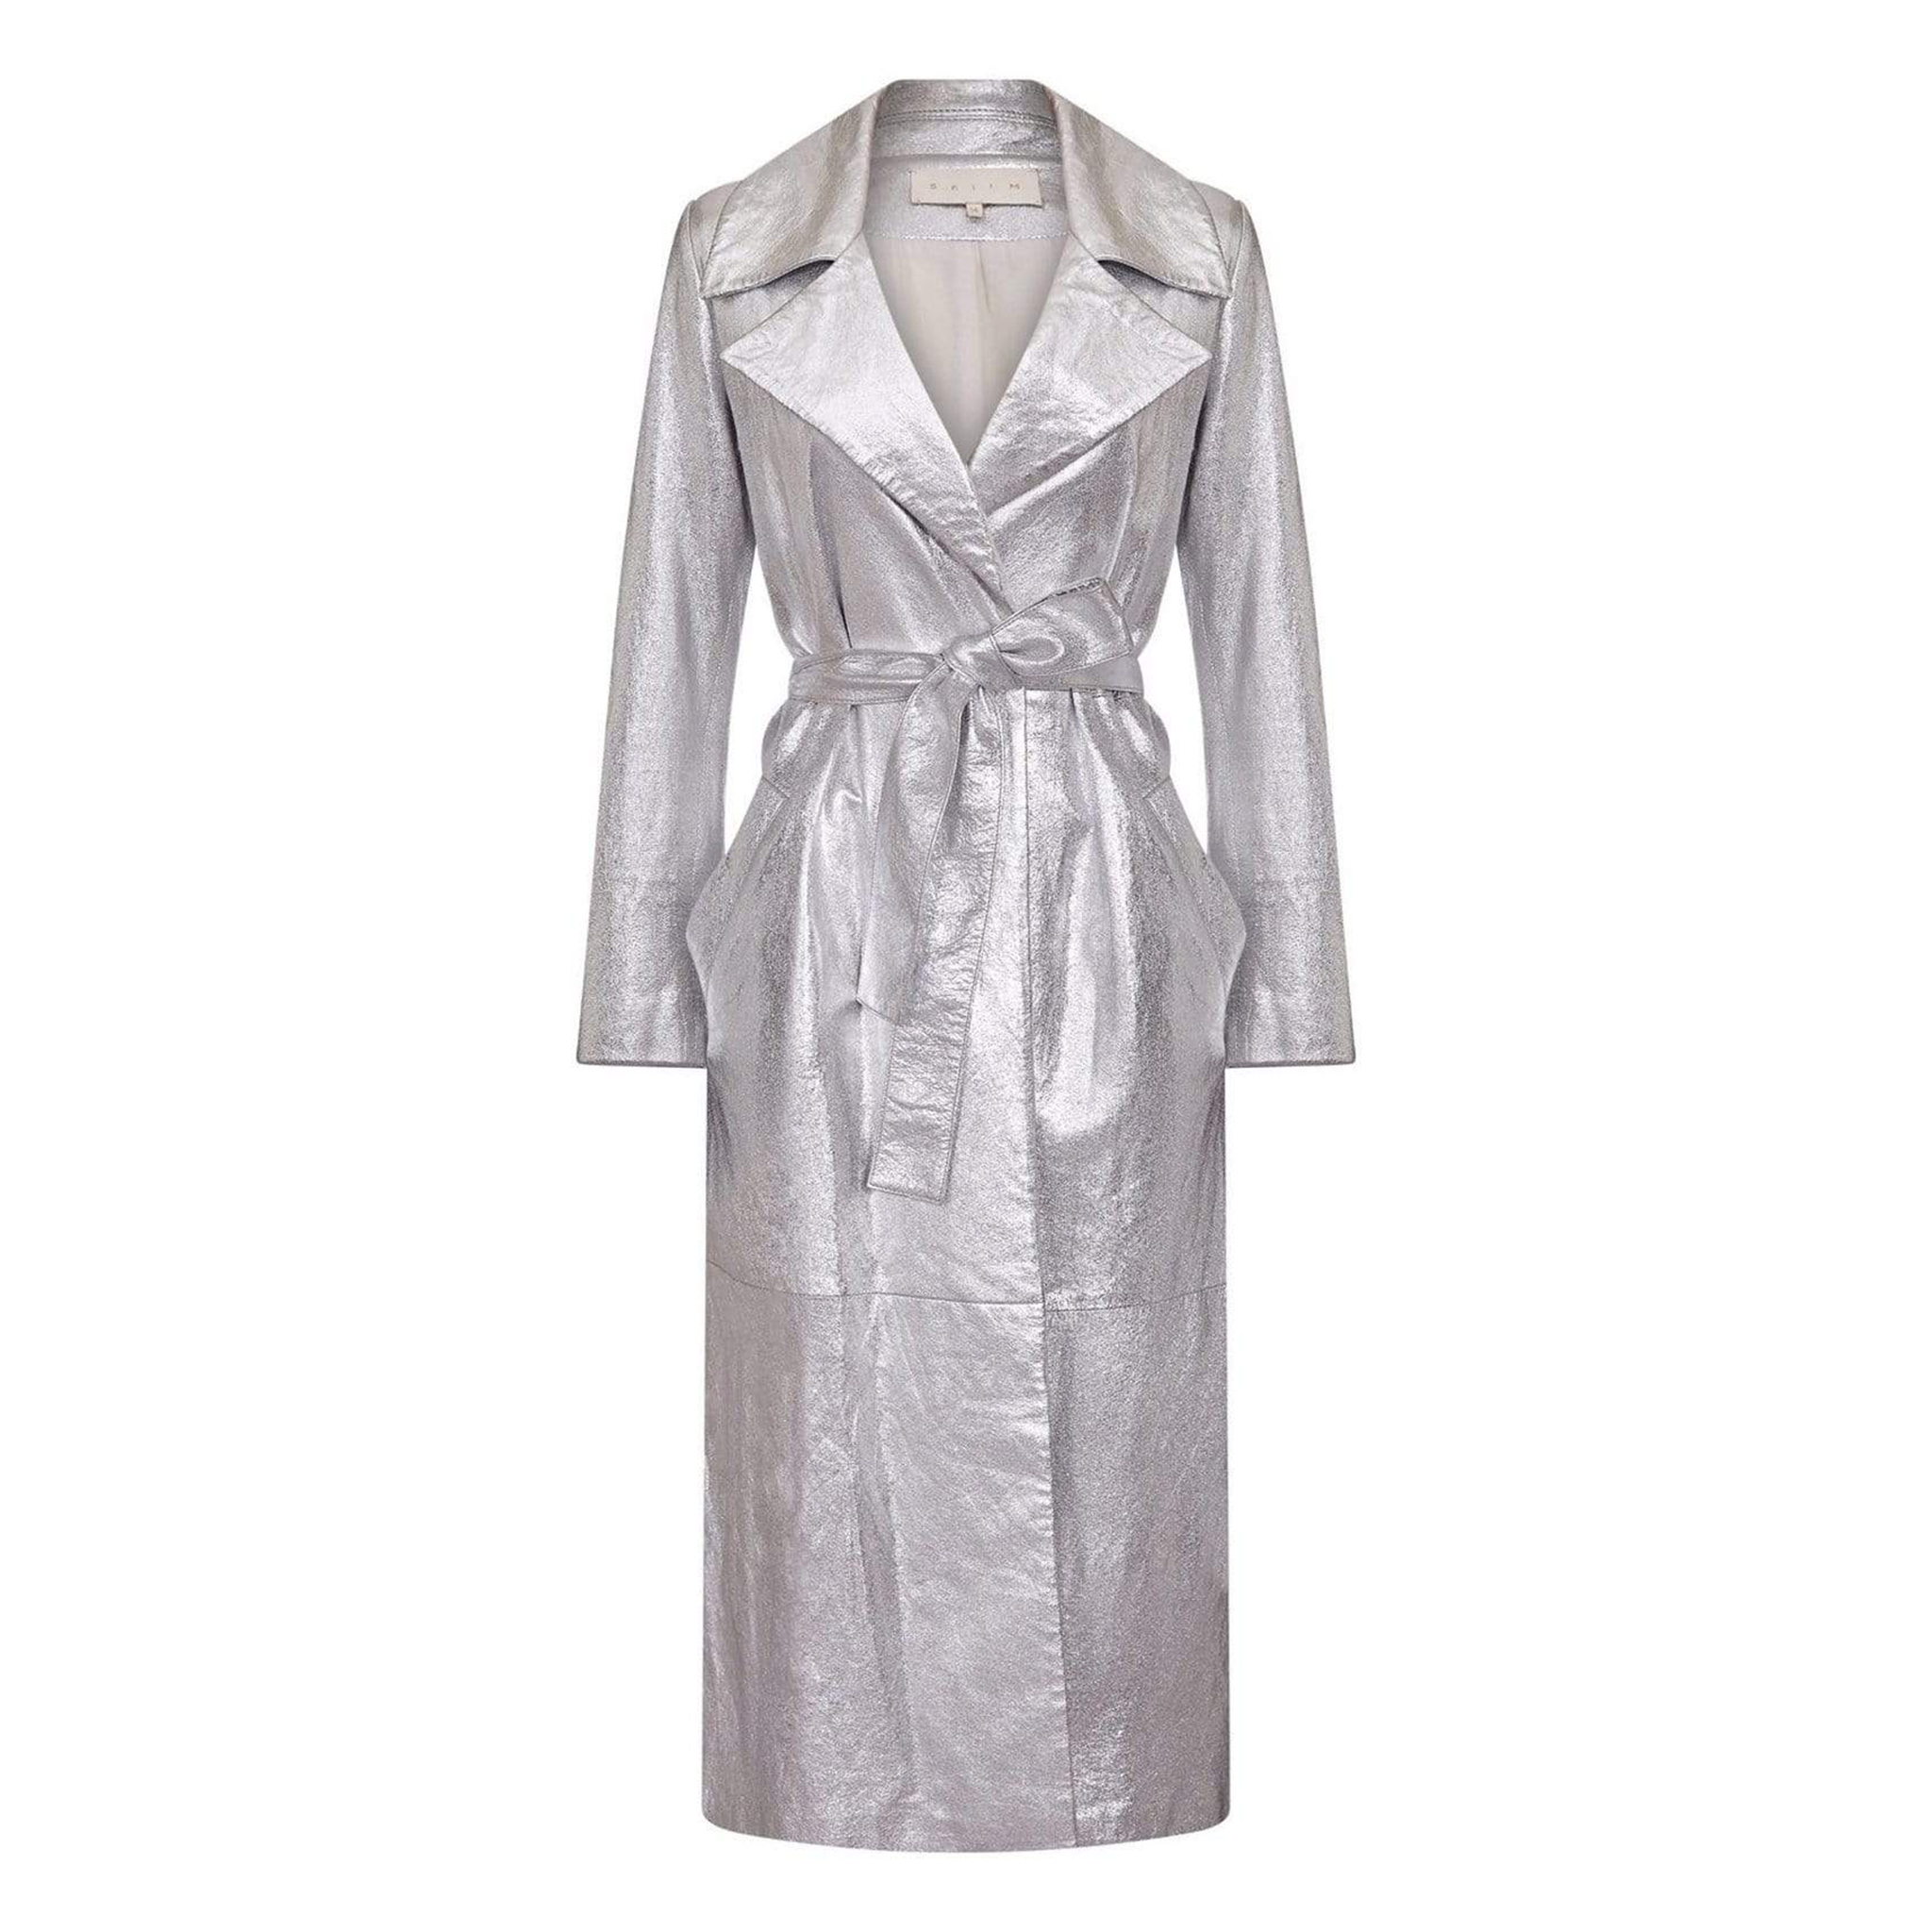 Karla LEATHER TRENCH COAT - FOIL